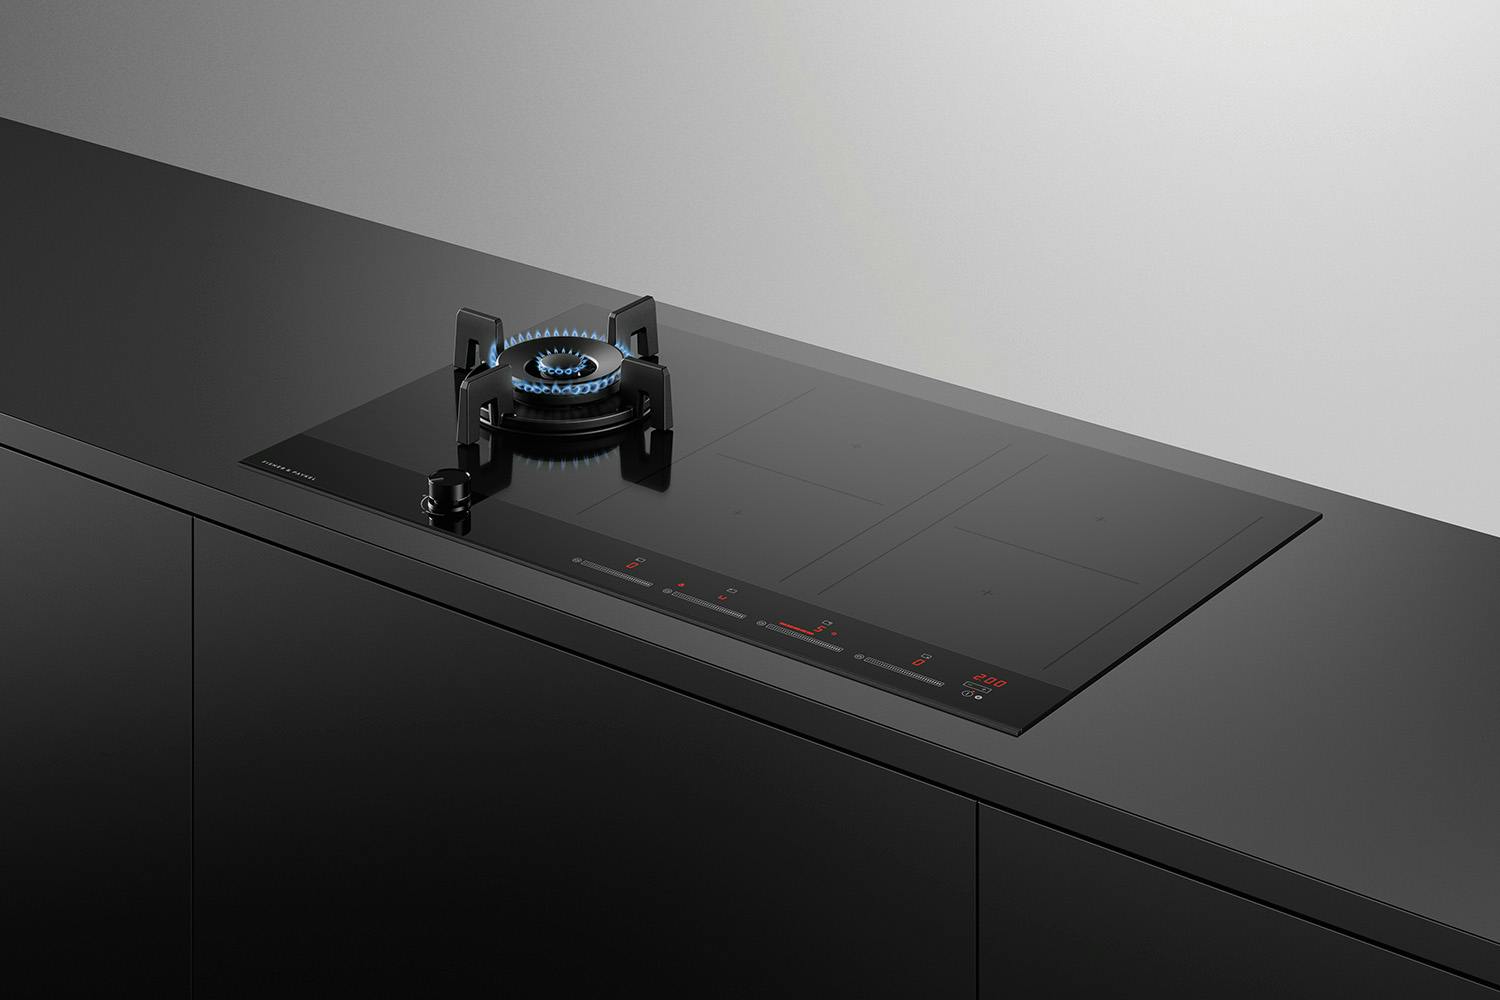 Fisher & Paykel 90cm 4 + 1 Zone Gas with Induction Cooktop - Black Glass (Series 9/CGI905DNGTB4)